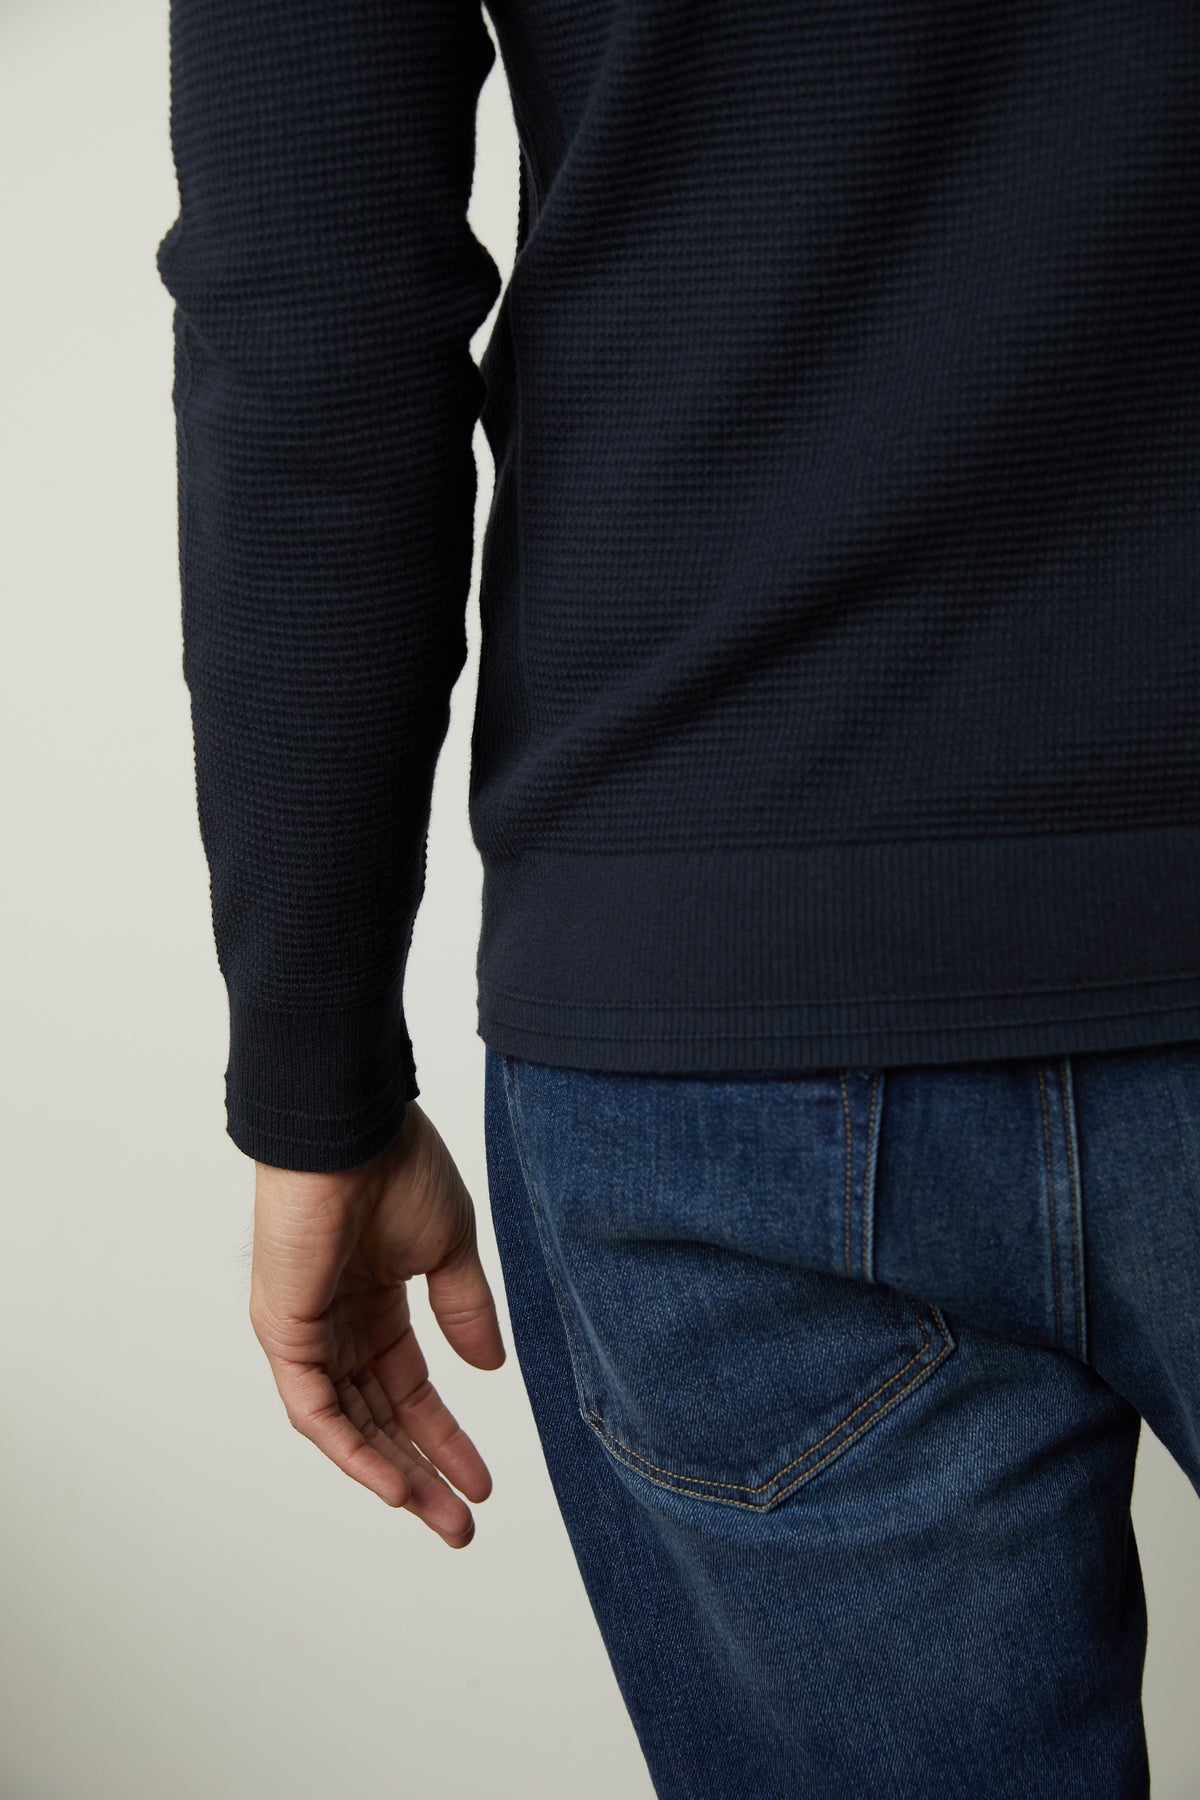 The back view of a man wearing jeans and a Velvet by Graham & Spencer WALTER CREW NECK SWEATER.-26846174707905